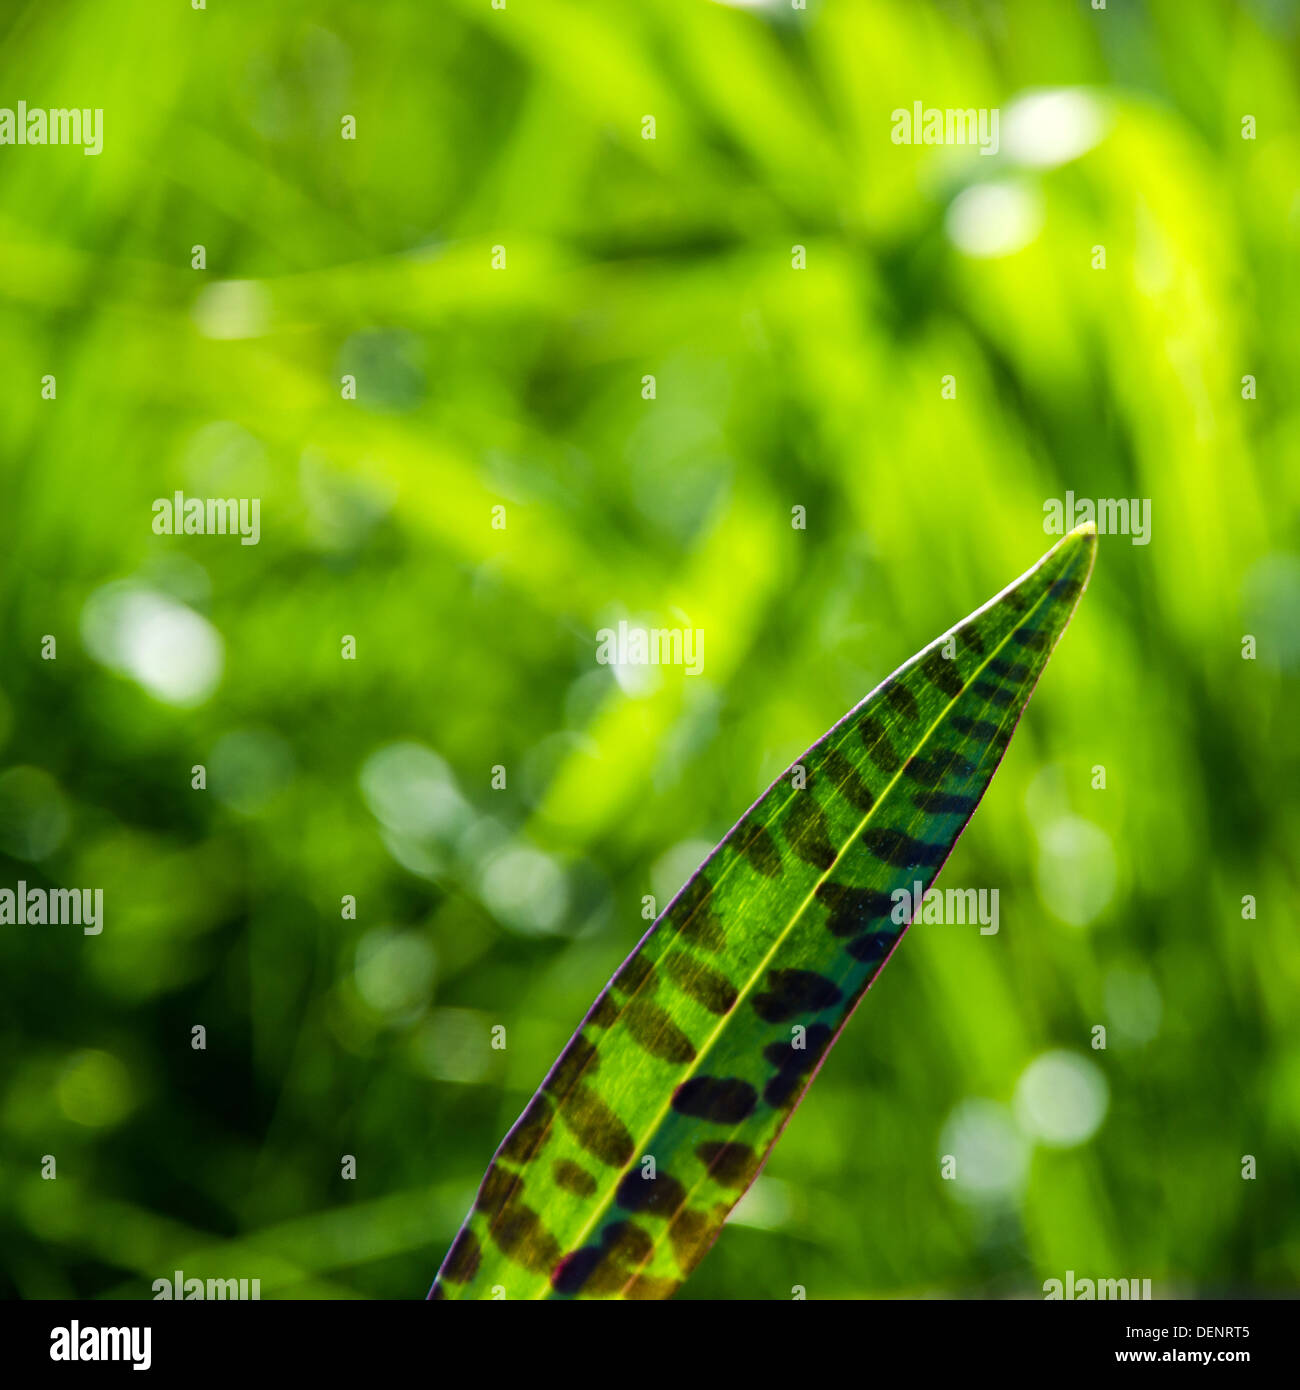 Heath spotted orchid leaf at a bright and green background. From the island Oland in Sweden. Stock Photo